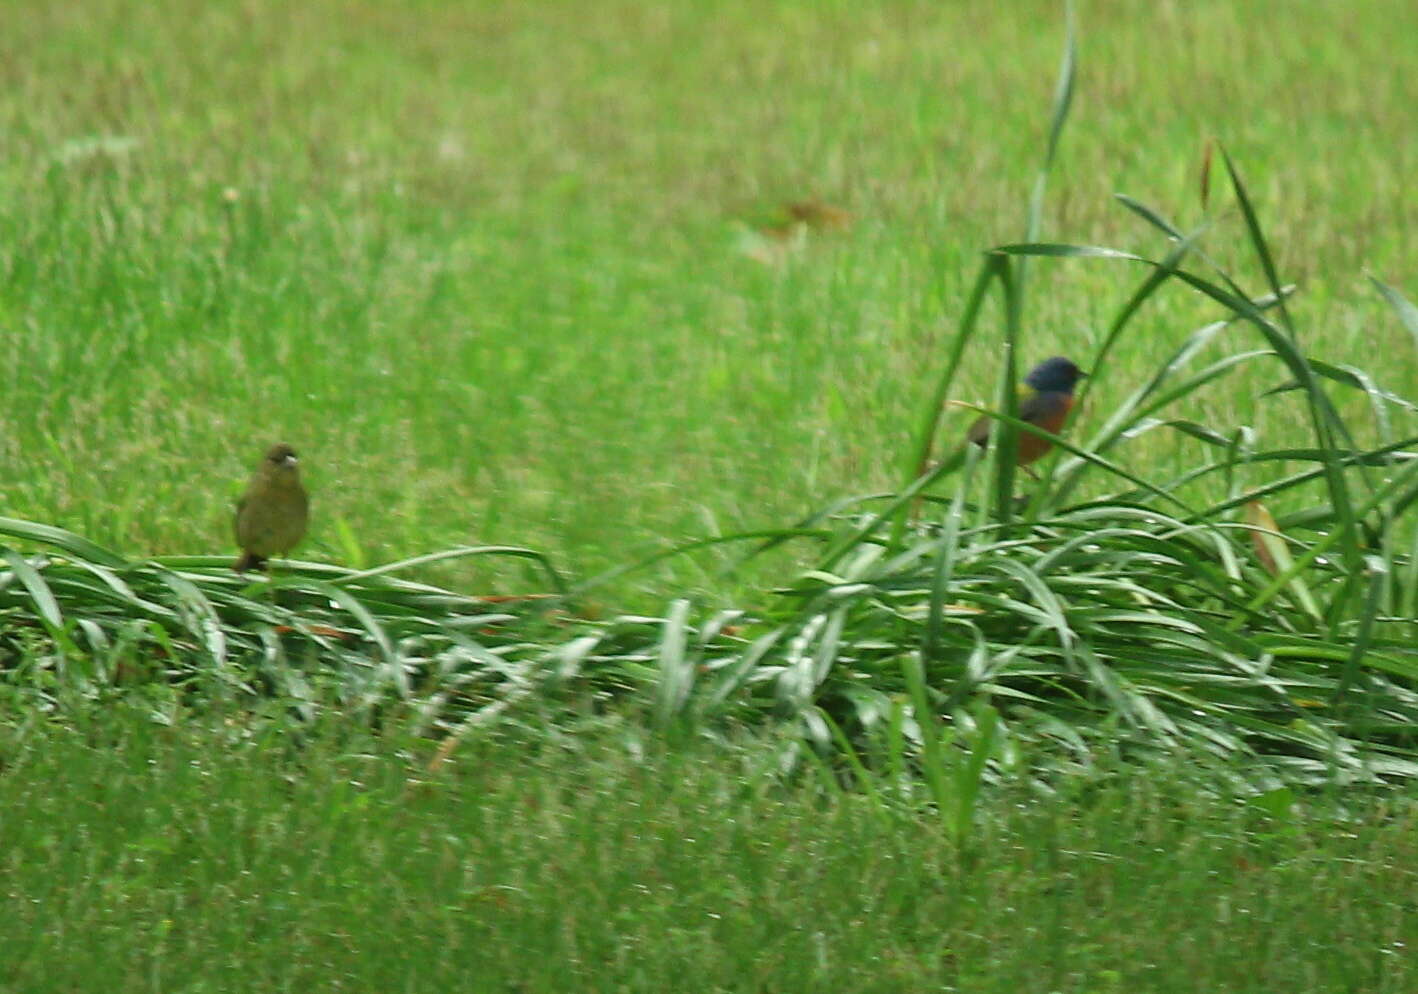 Image of Painted Bunting